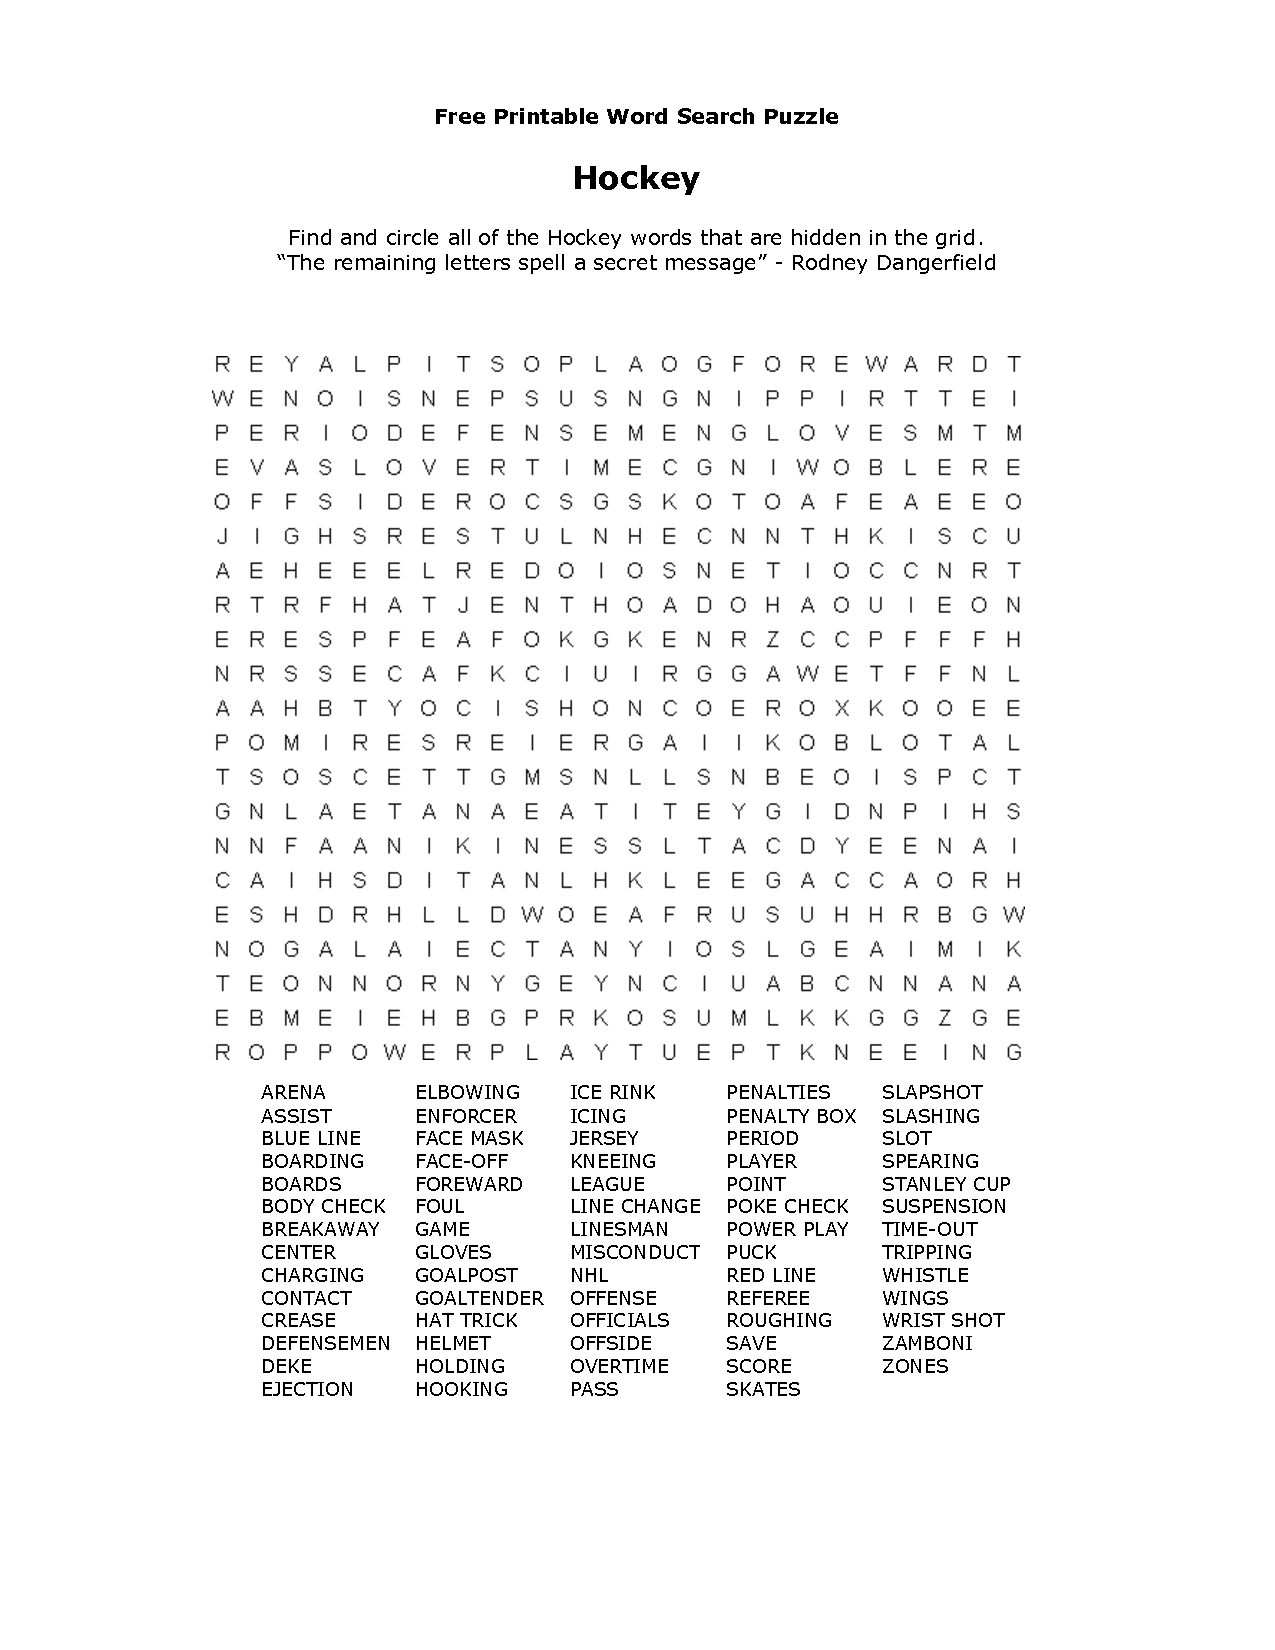 Free Printable Word Searches | طلال | Word Search Puzzles, Free - Free Printable Word Search Puzzles For Adults